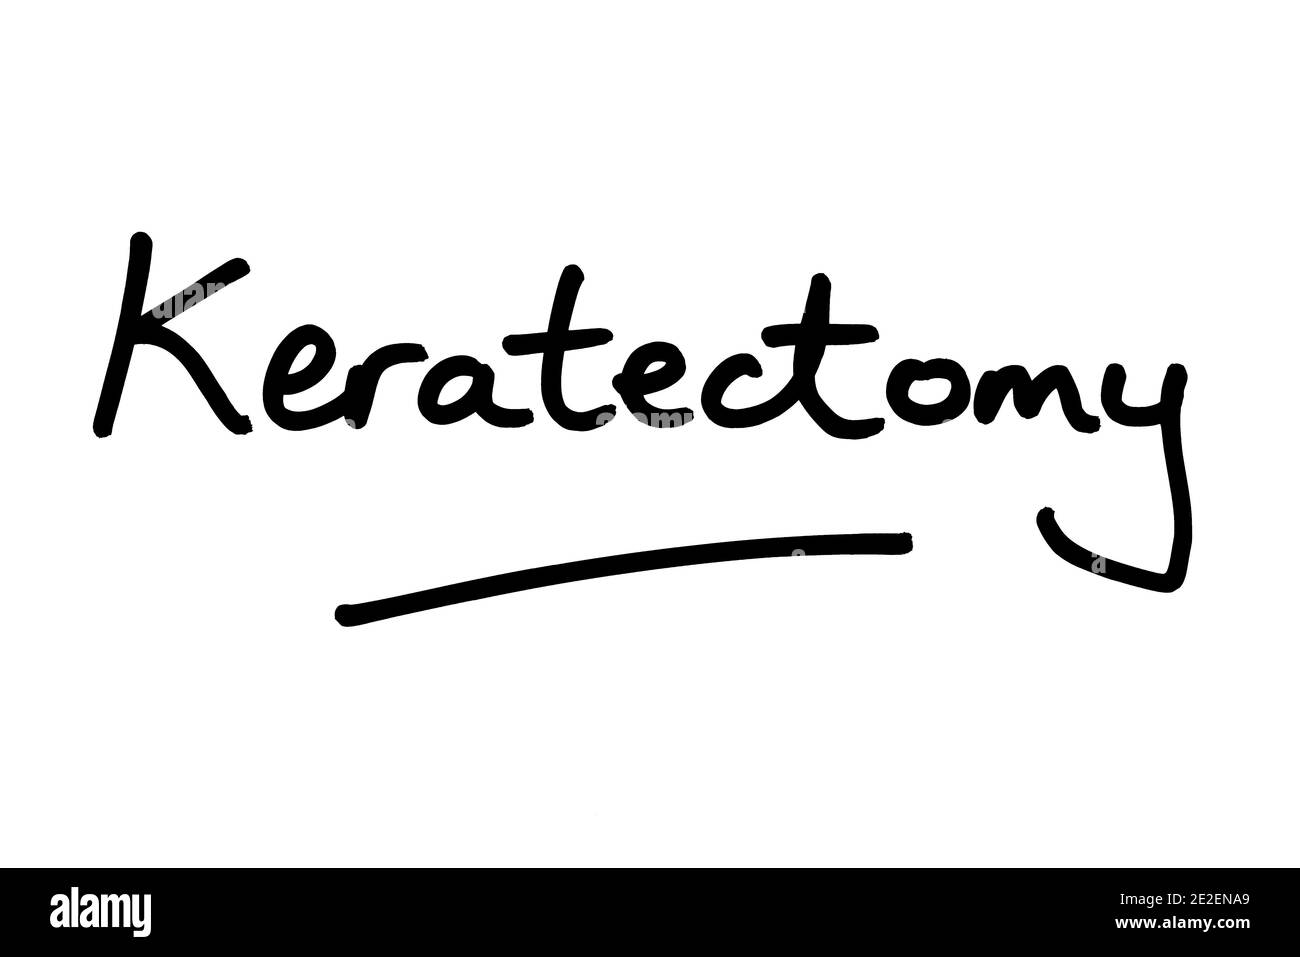 The word Keratectomy, handwritten on a white background. Stock Photo